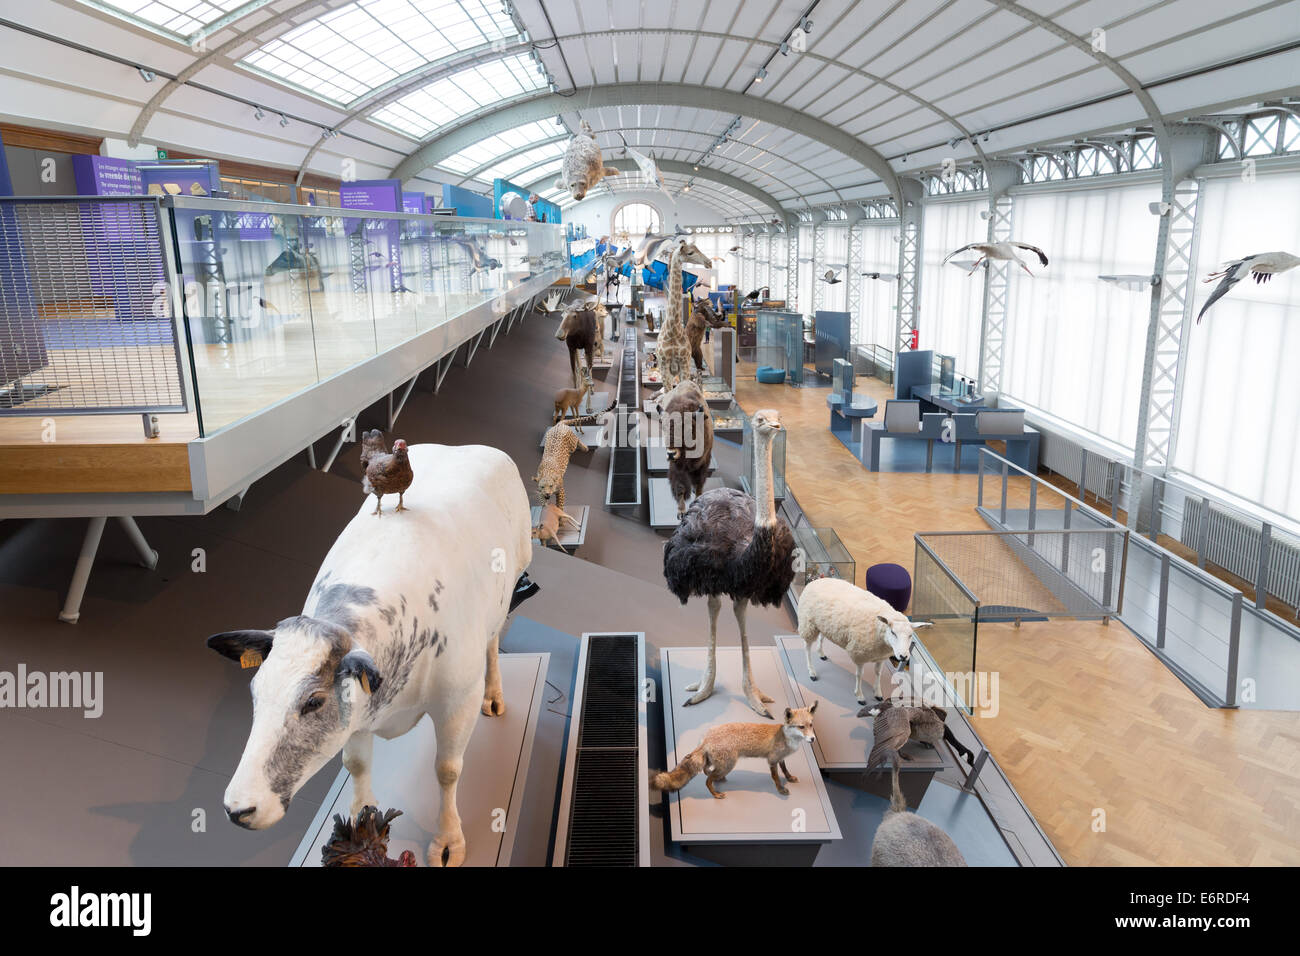 Stuffed animals in the Natural Science Museum of Brussels, Belgium Stock Photo